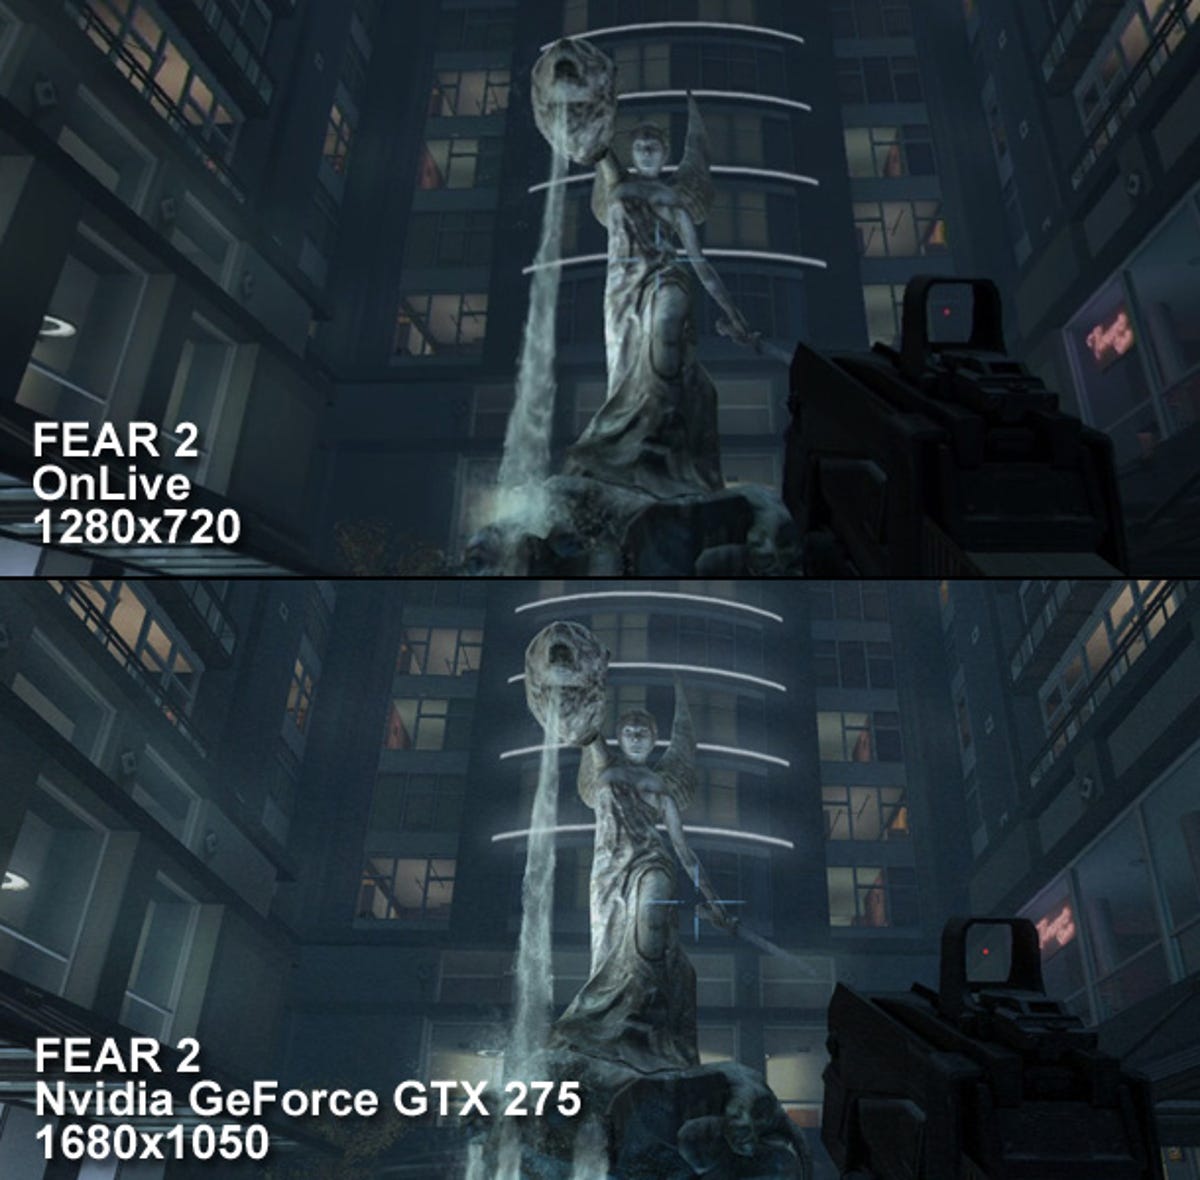 FEAR 2 played via OnLive, compared to the same game played on a high-end gaming PC. Note the level of detail on the statue, as well as the lighting bloom missing from the OnLive version.